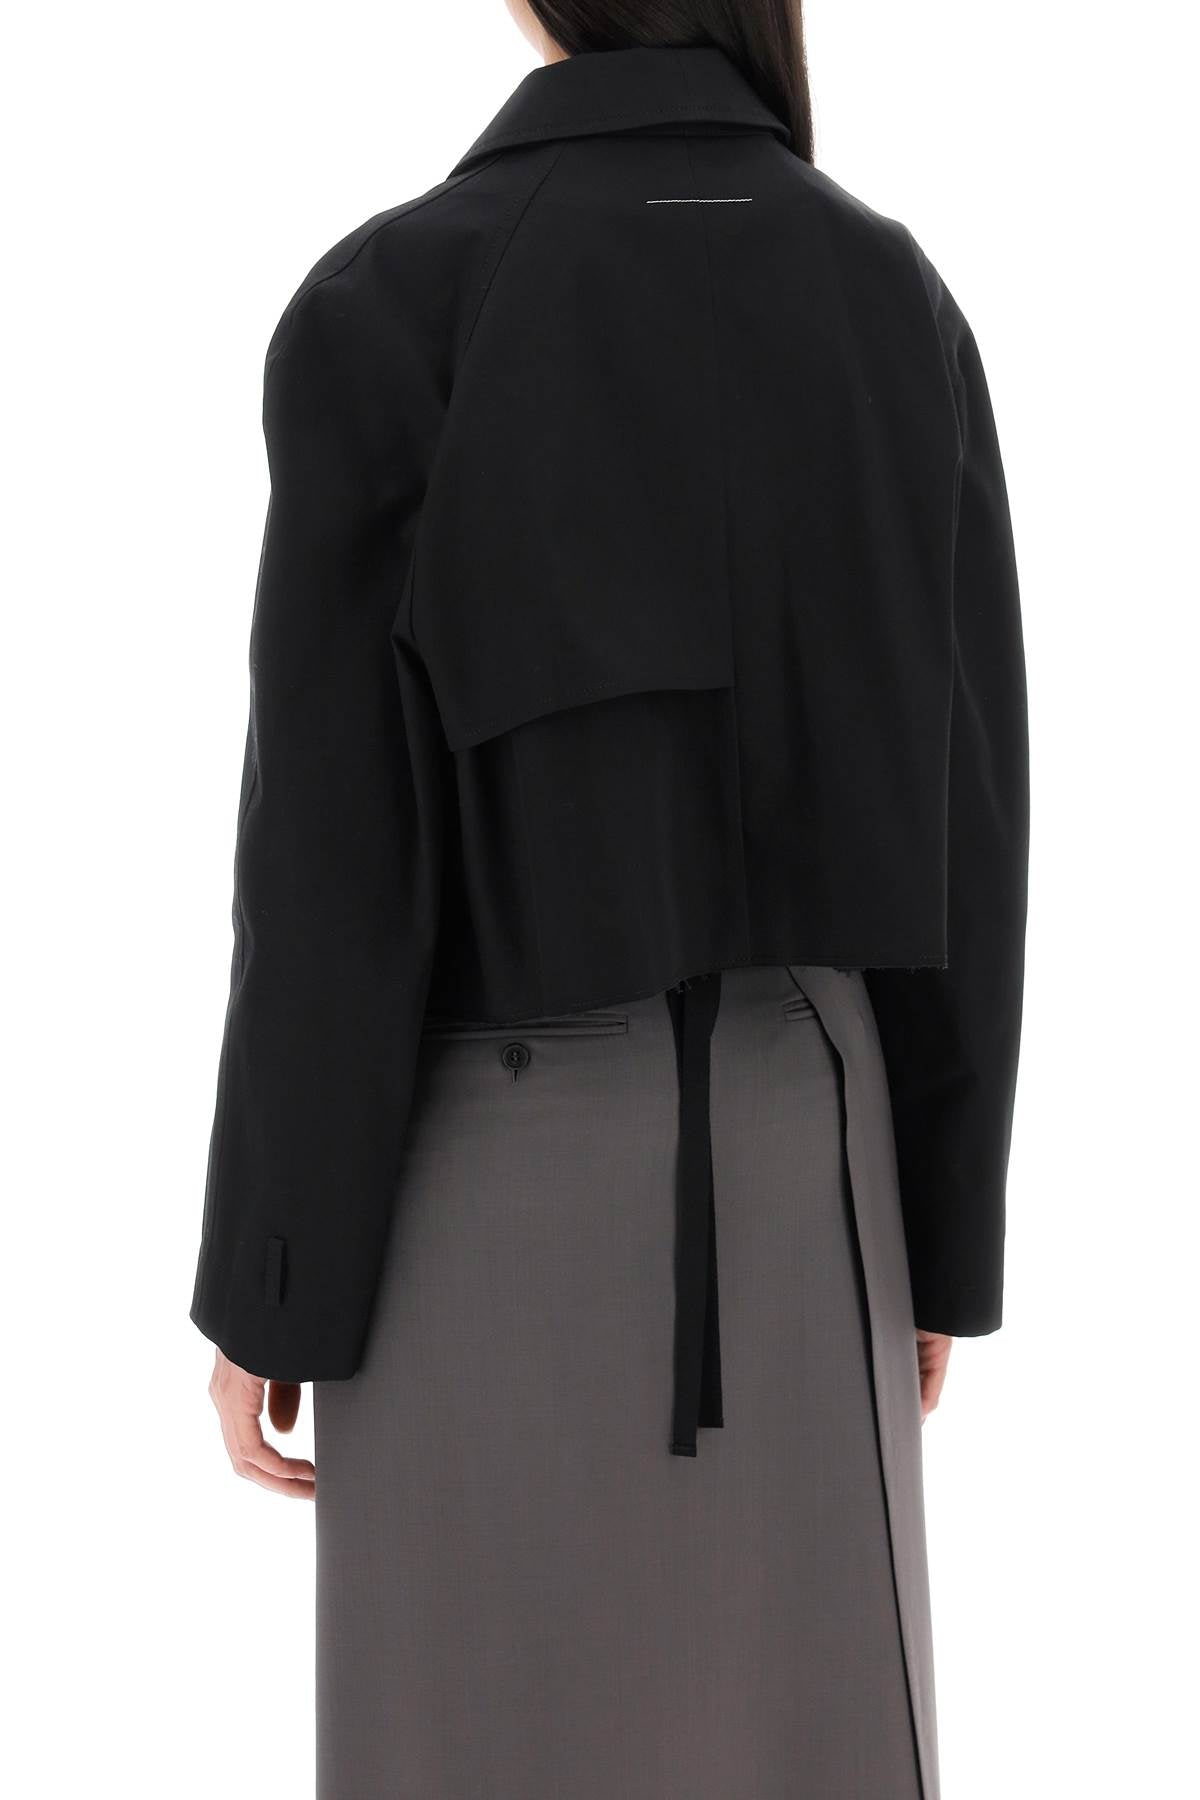 MM6 MAISON MARGIELA Cropped Double-Breasted Jacket for Women in NERO